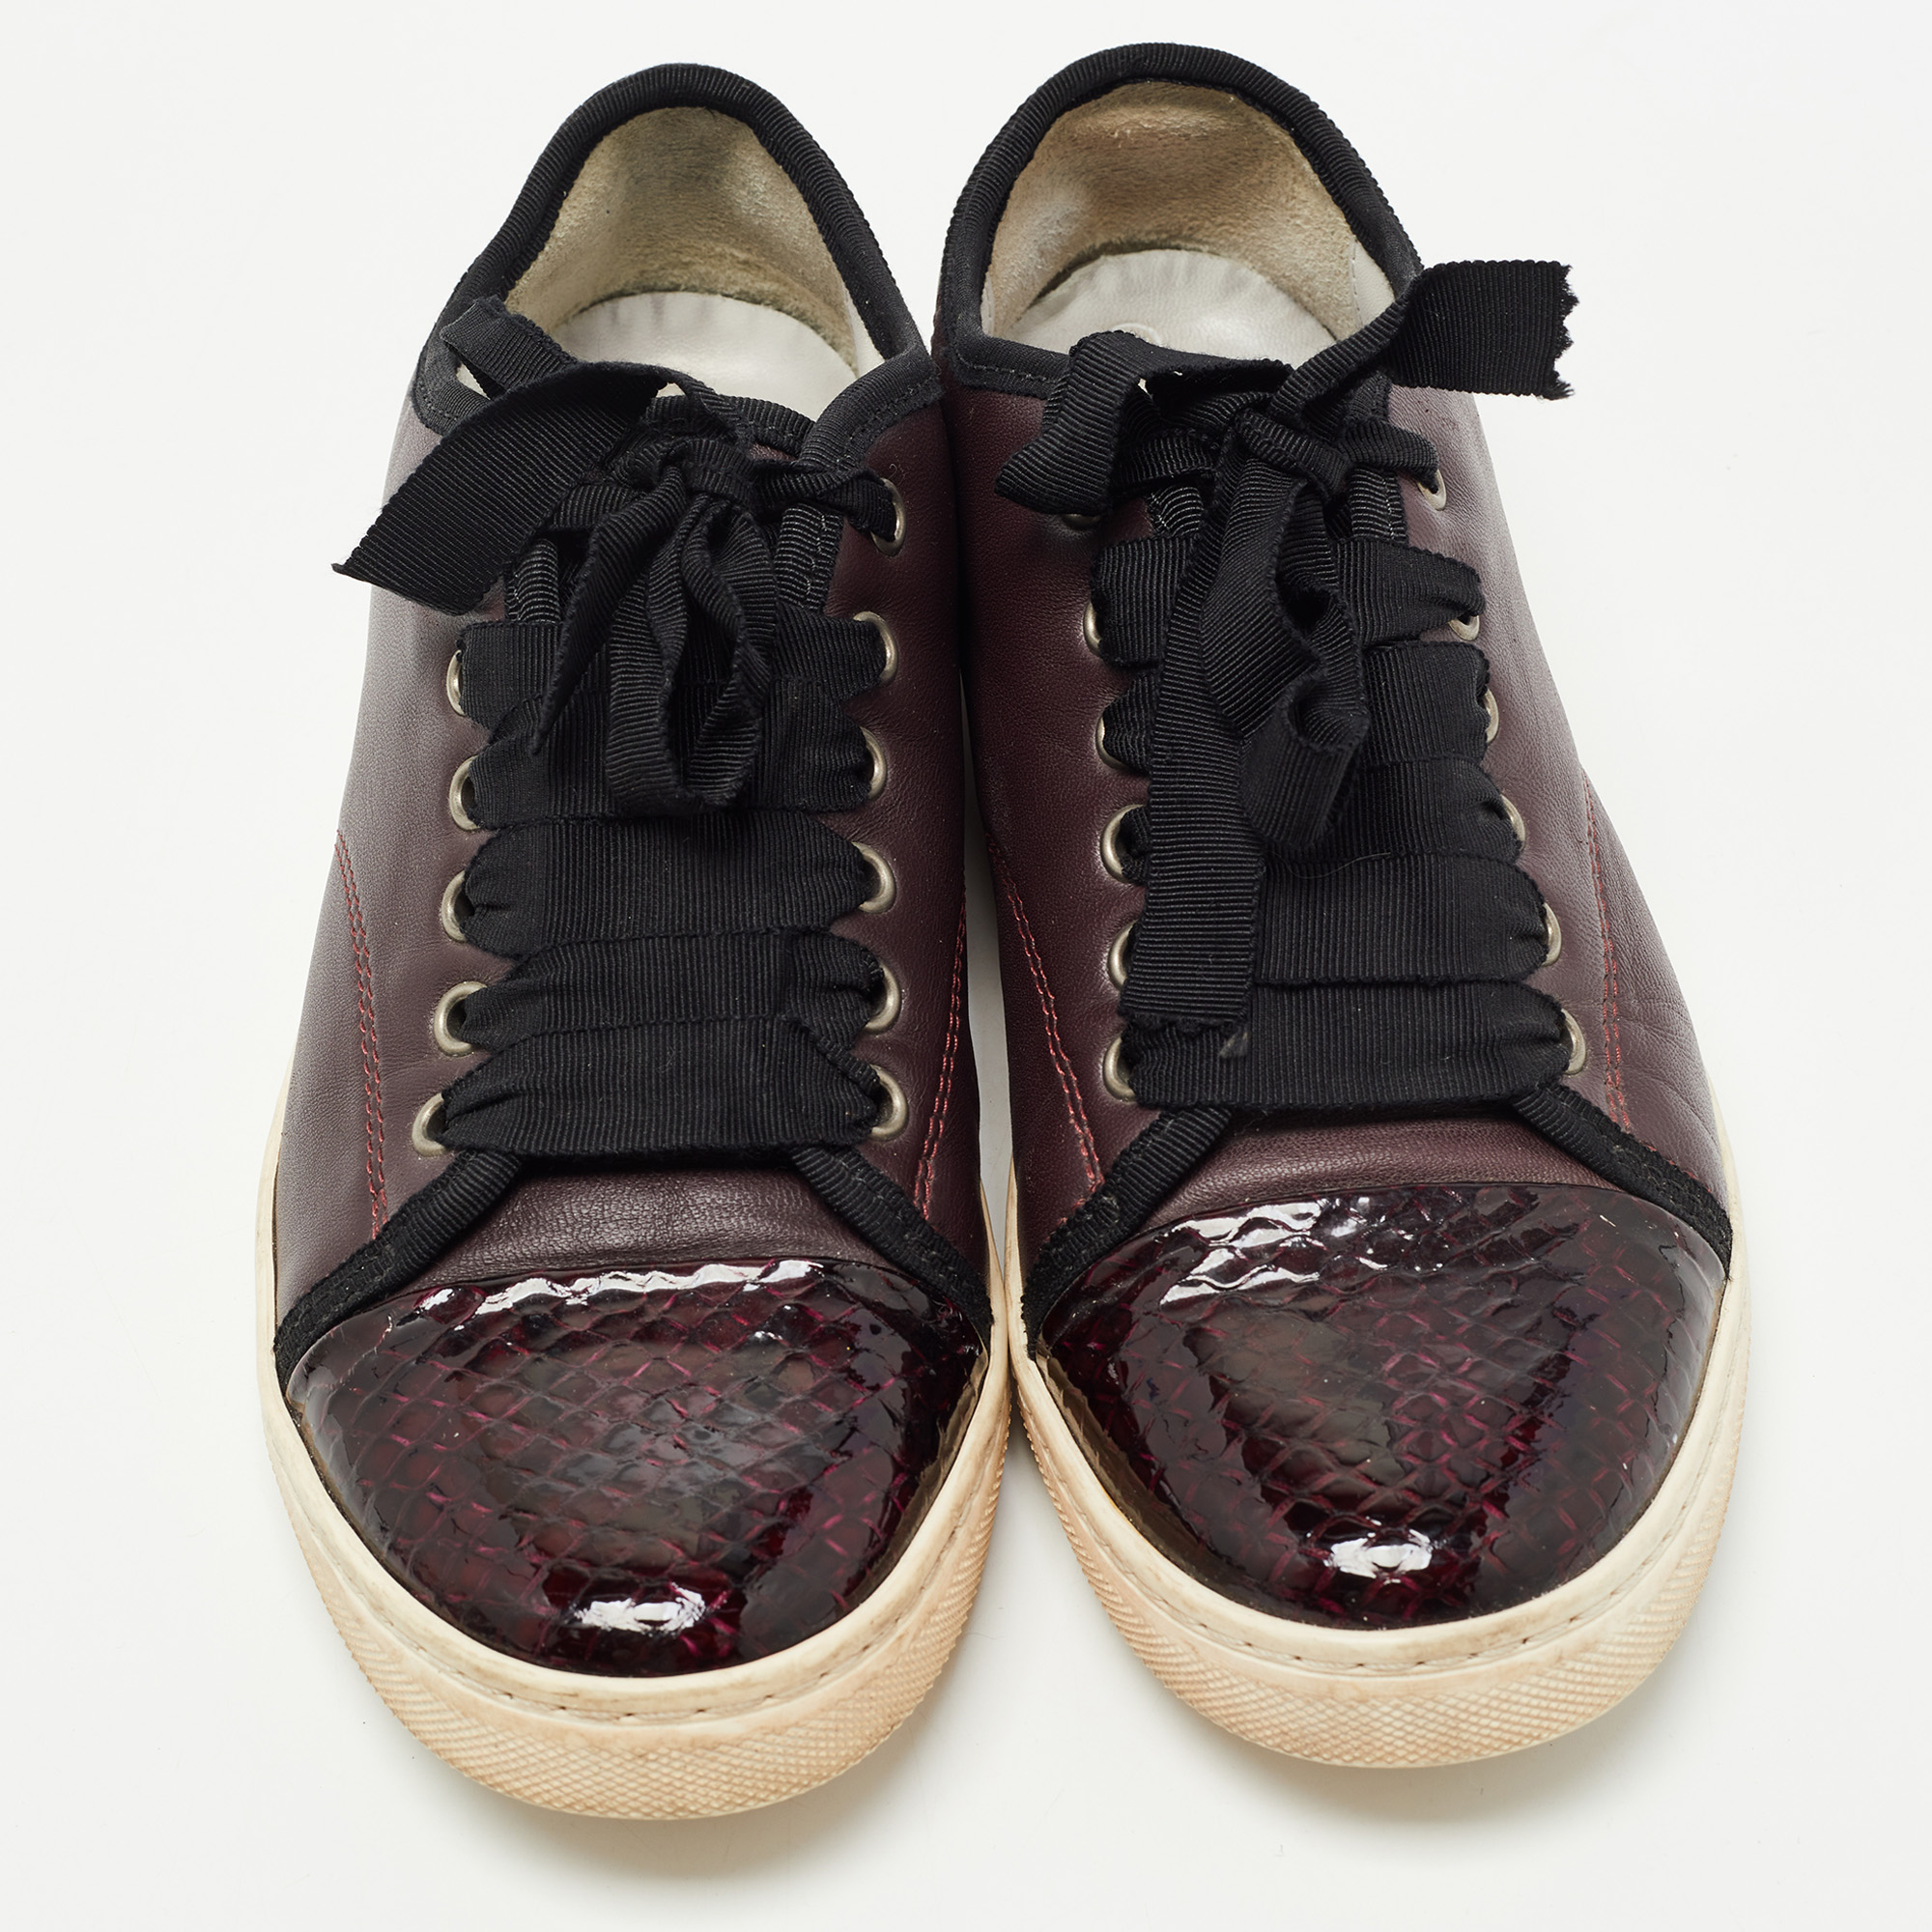 Lanvin Burgundy Leather And Embossed Python Cap Toe Low Top Sneakers Size 37